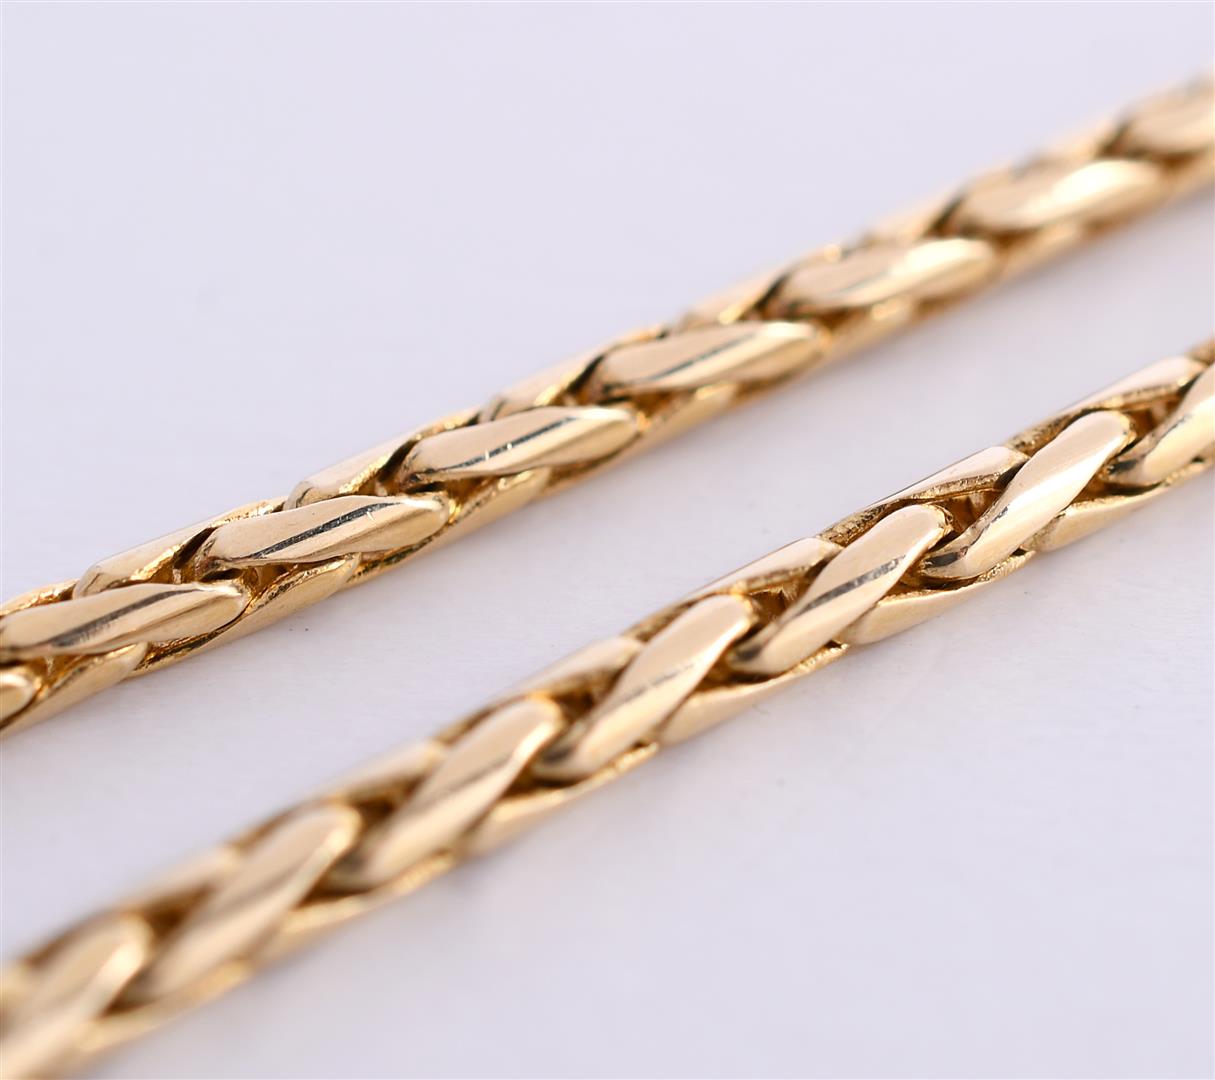 14 kt yellow gold solid foxtail necklace. Length 42 cm, width 2 mm. Hallmarks present - Image 2 of 4